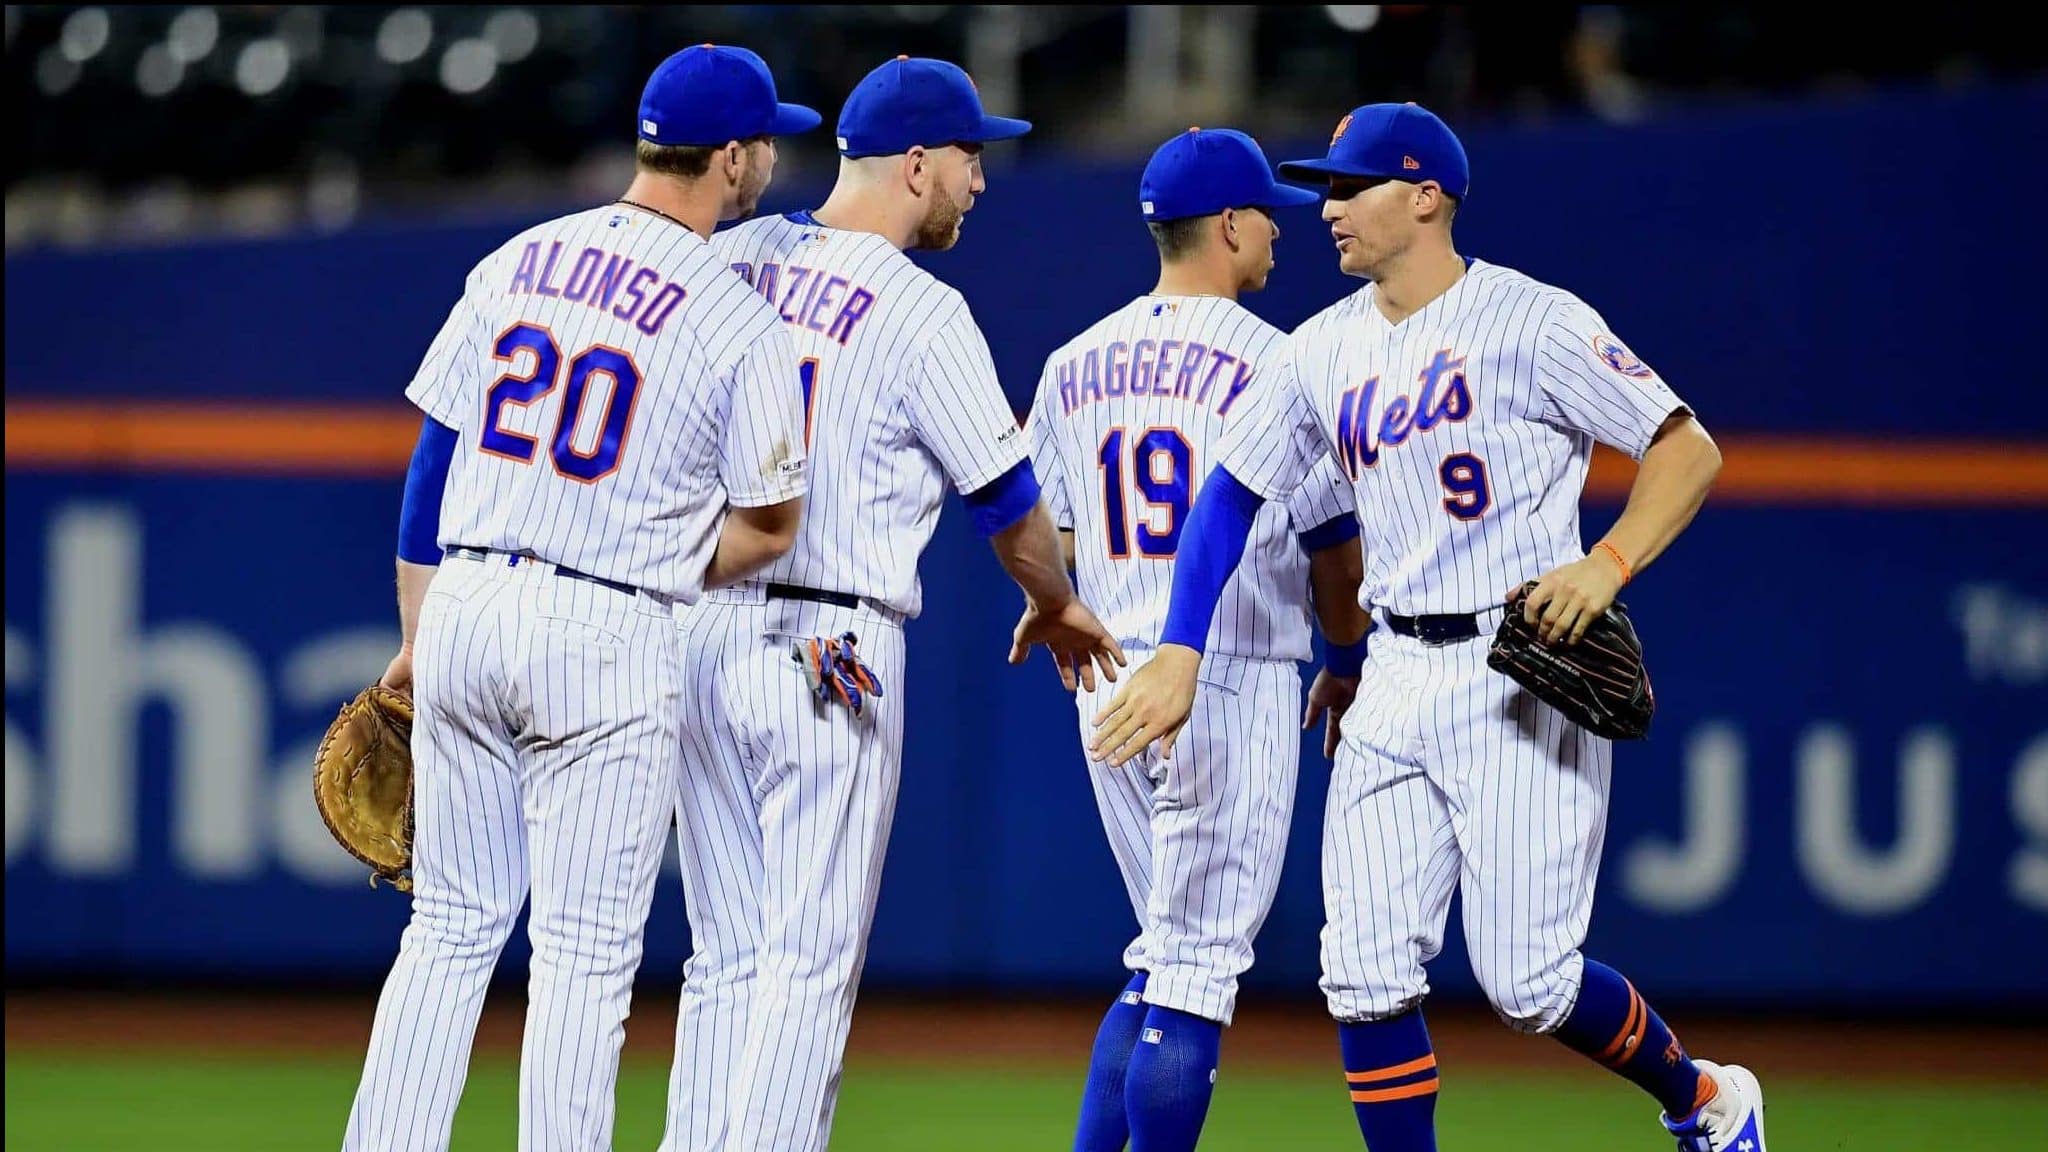 NEW YORK, NEW YORK - SEPTEMBER 25: Brandon Nimmo #9 high fives Sam Haggerty #19, Todd Frazier #21, and Pete Alonso #20 of the New York Mets after their 10-3 win over the Miami Marlins at Citi Field on September 25, 2019 in the Flushing neighborhood of the Queens borough in New York City.